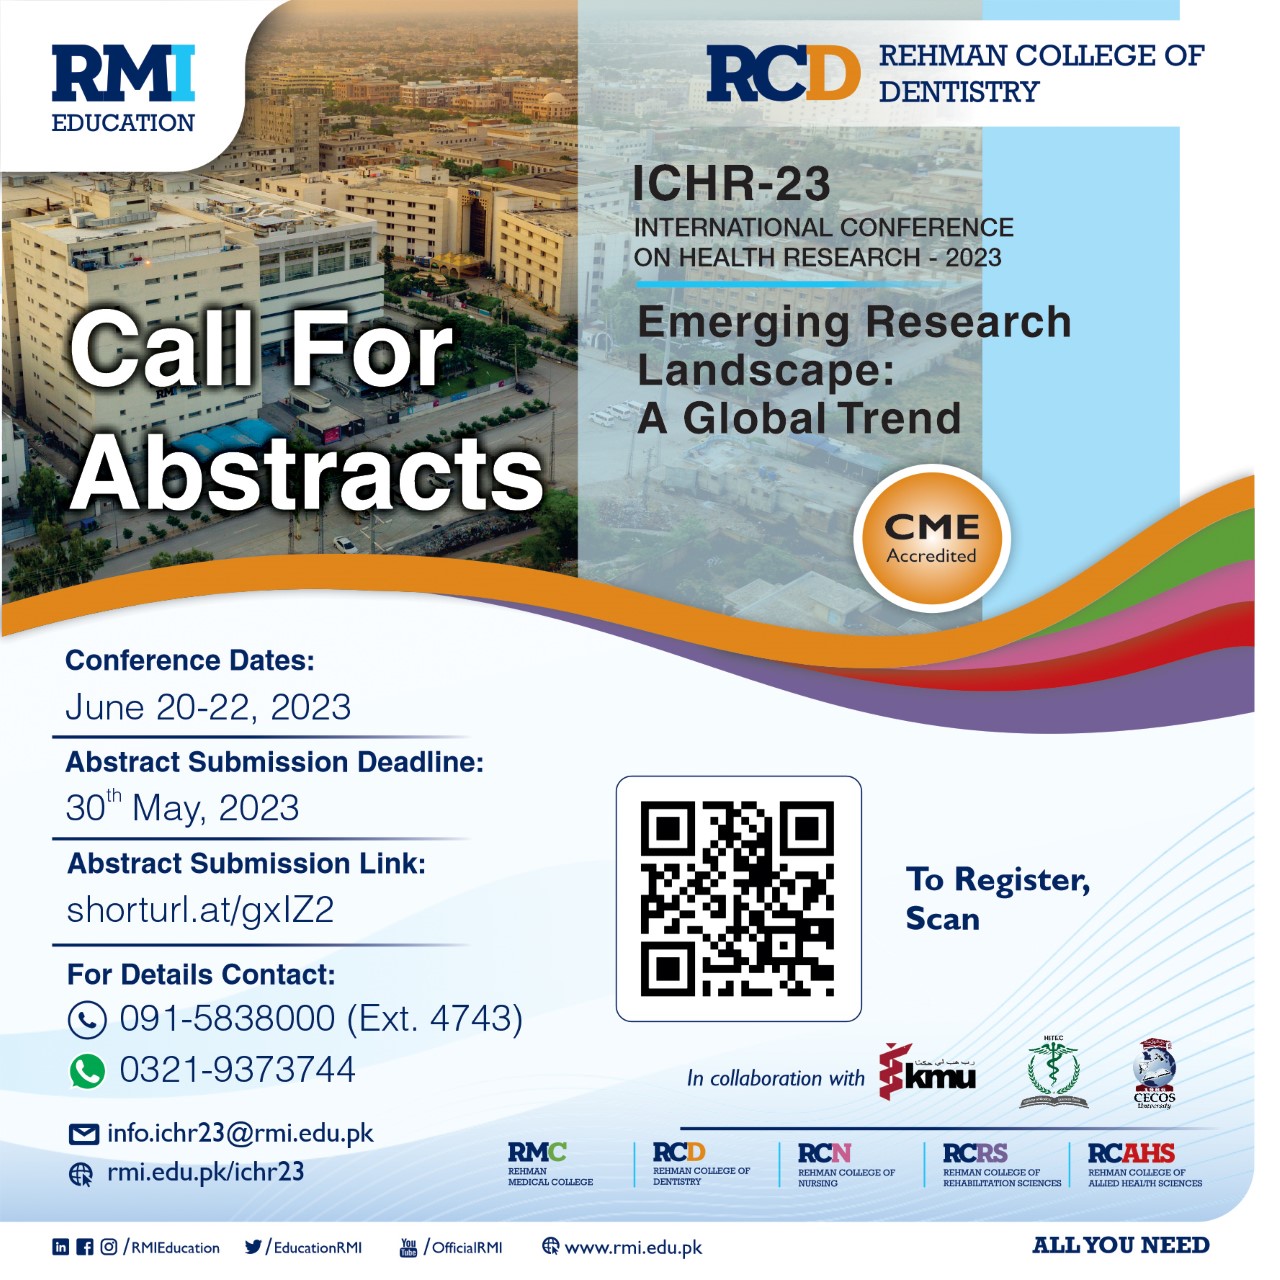 Call for abstract